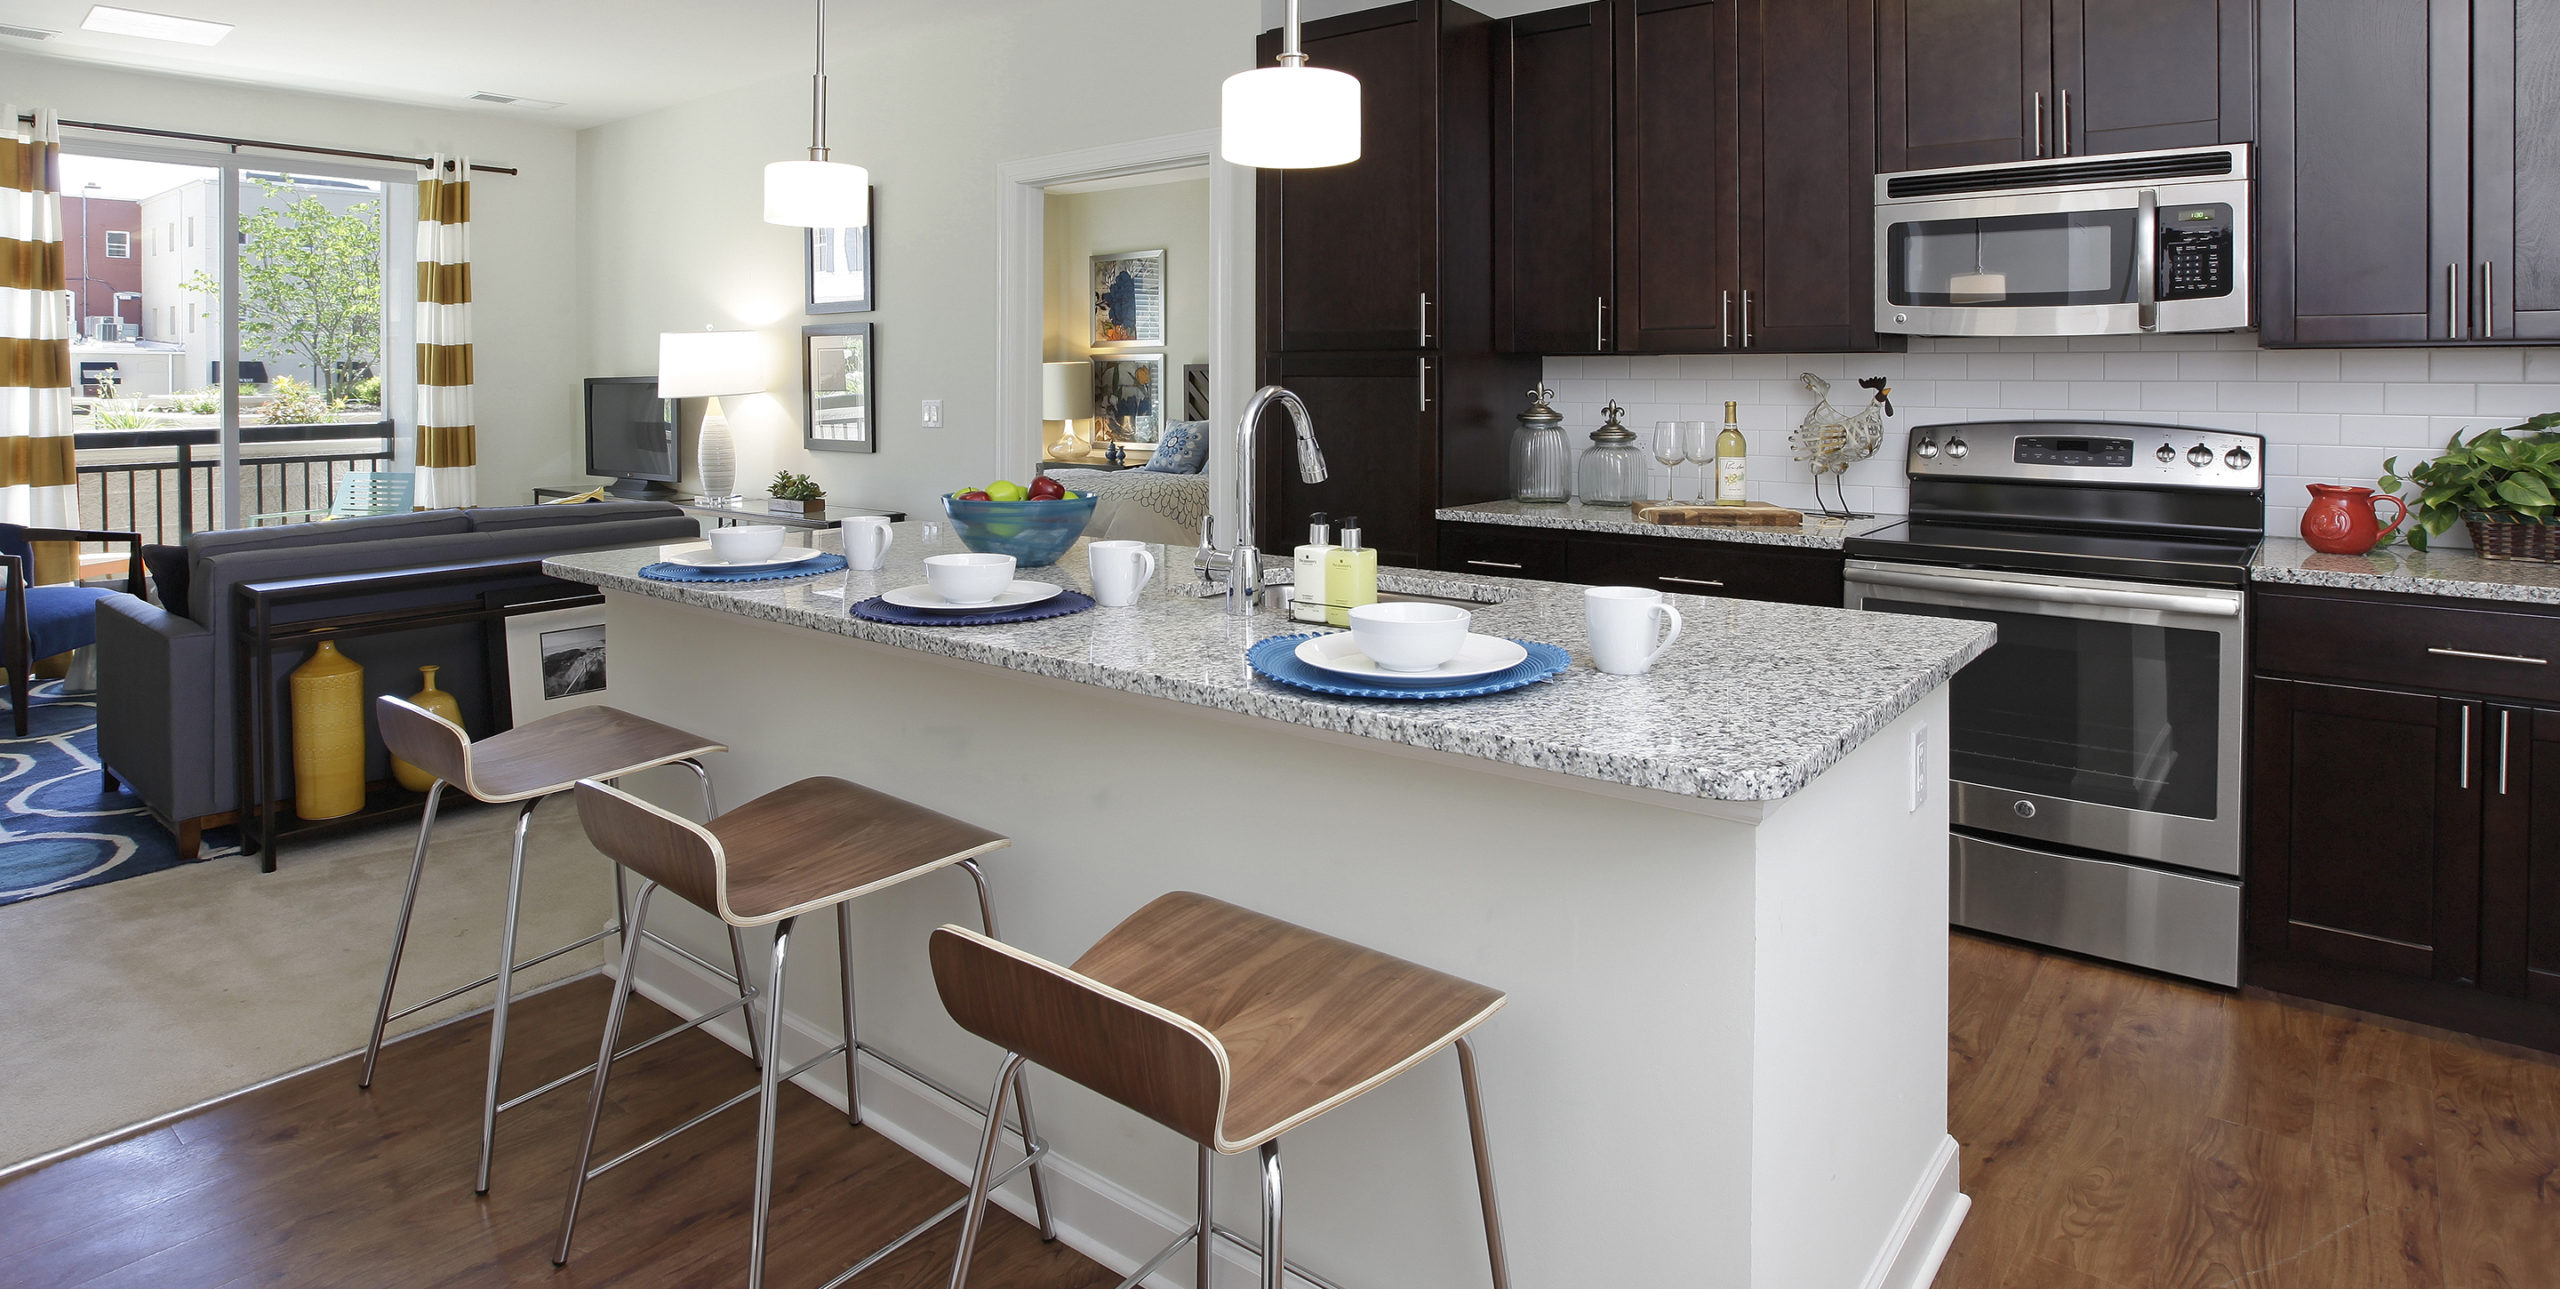 Kitchen in New Village at Patchogue apartments